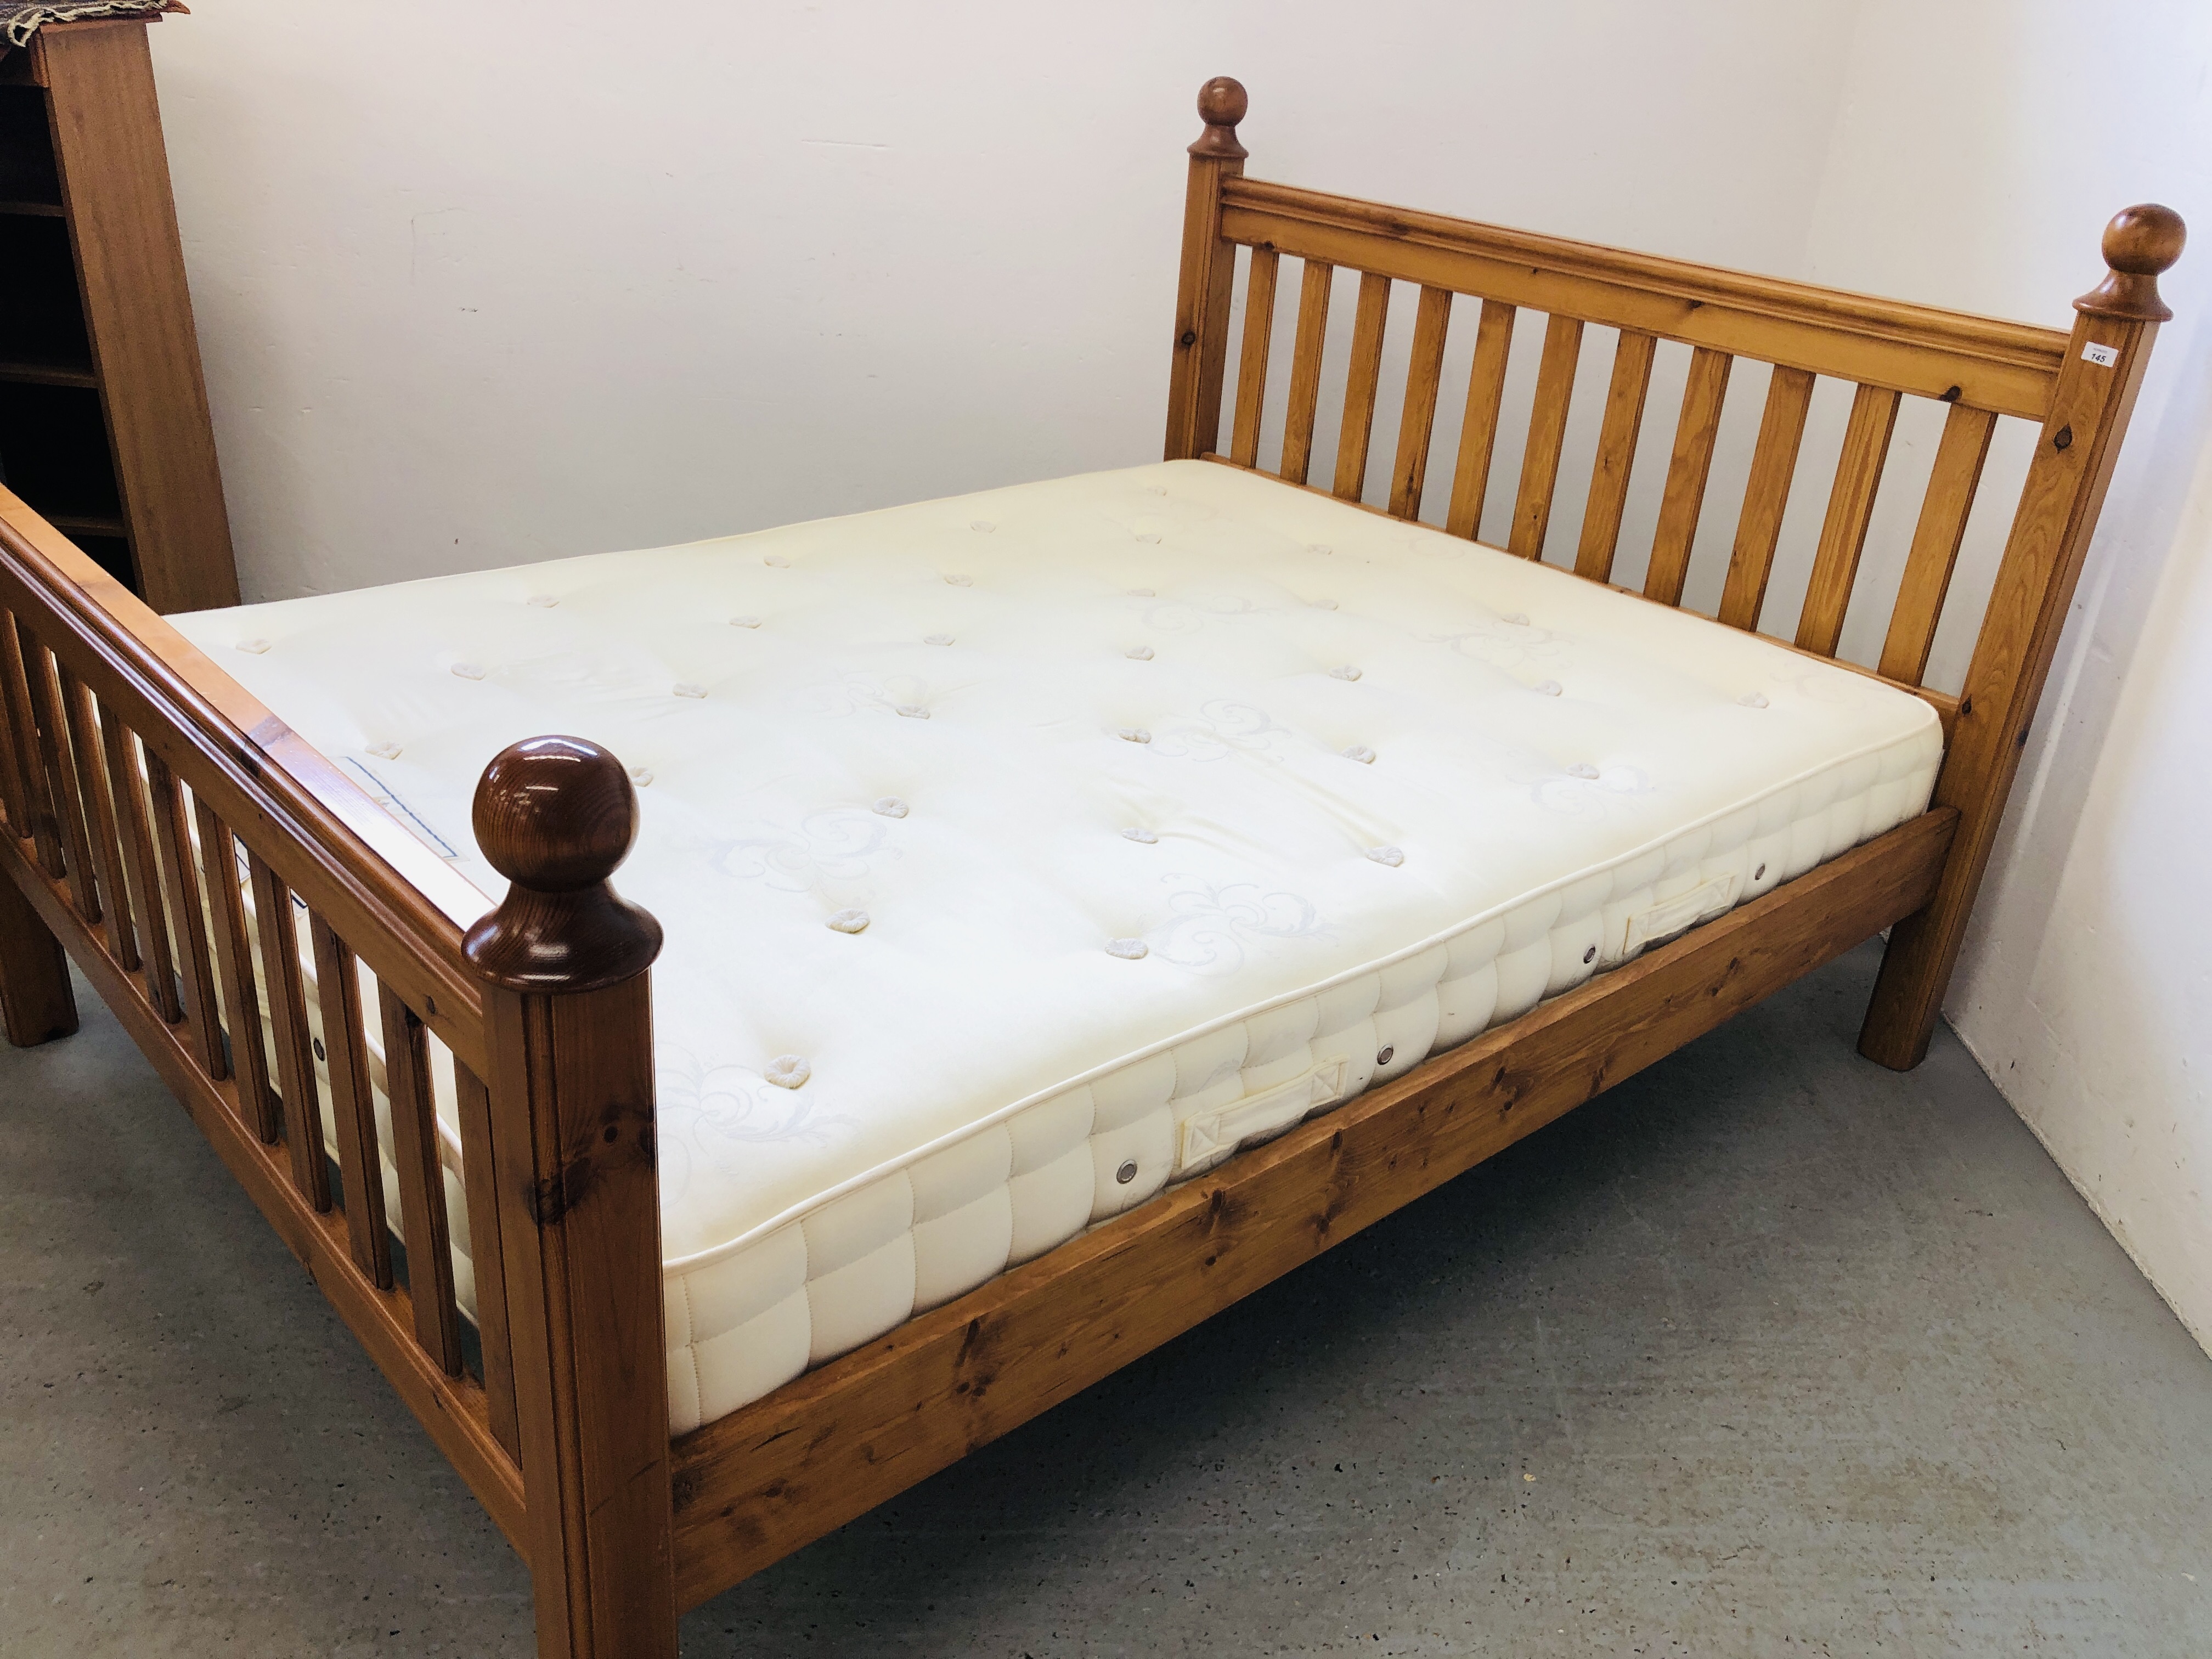 A GOOD QUALITY SOLID HONEY PINE KINGSIZE BED WITH HYPNOS "BARONET" POCKET SPRUNG MATTRESS. - Image 5 of 6